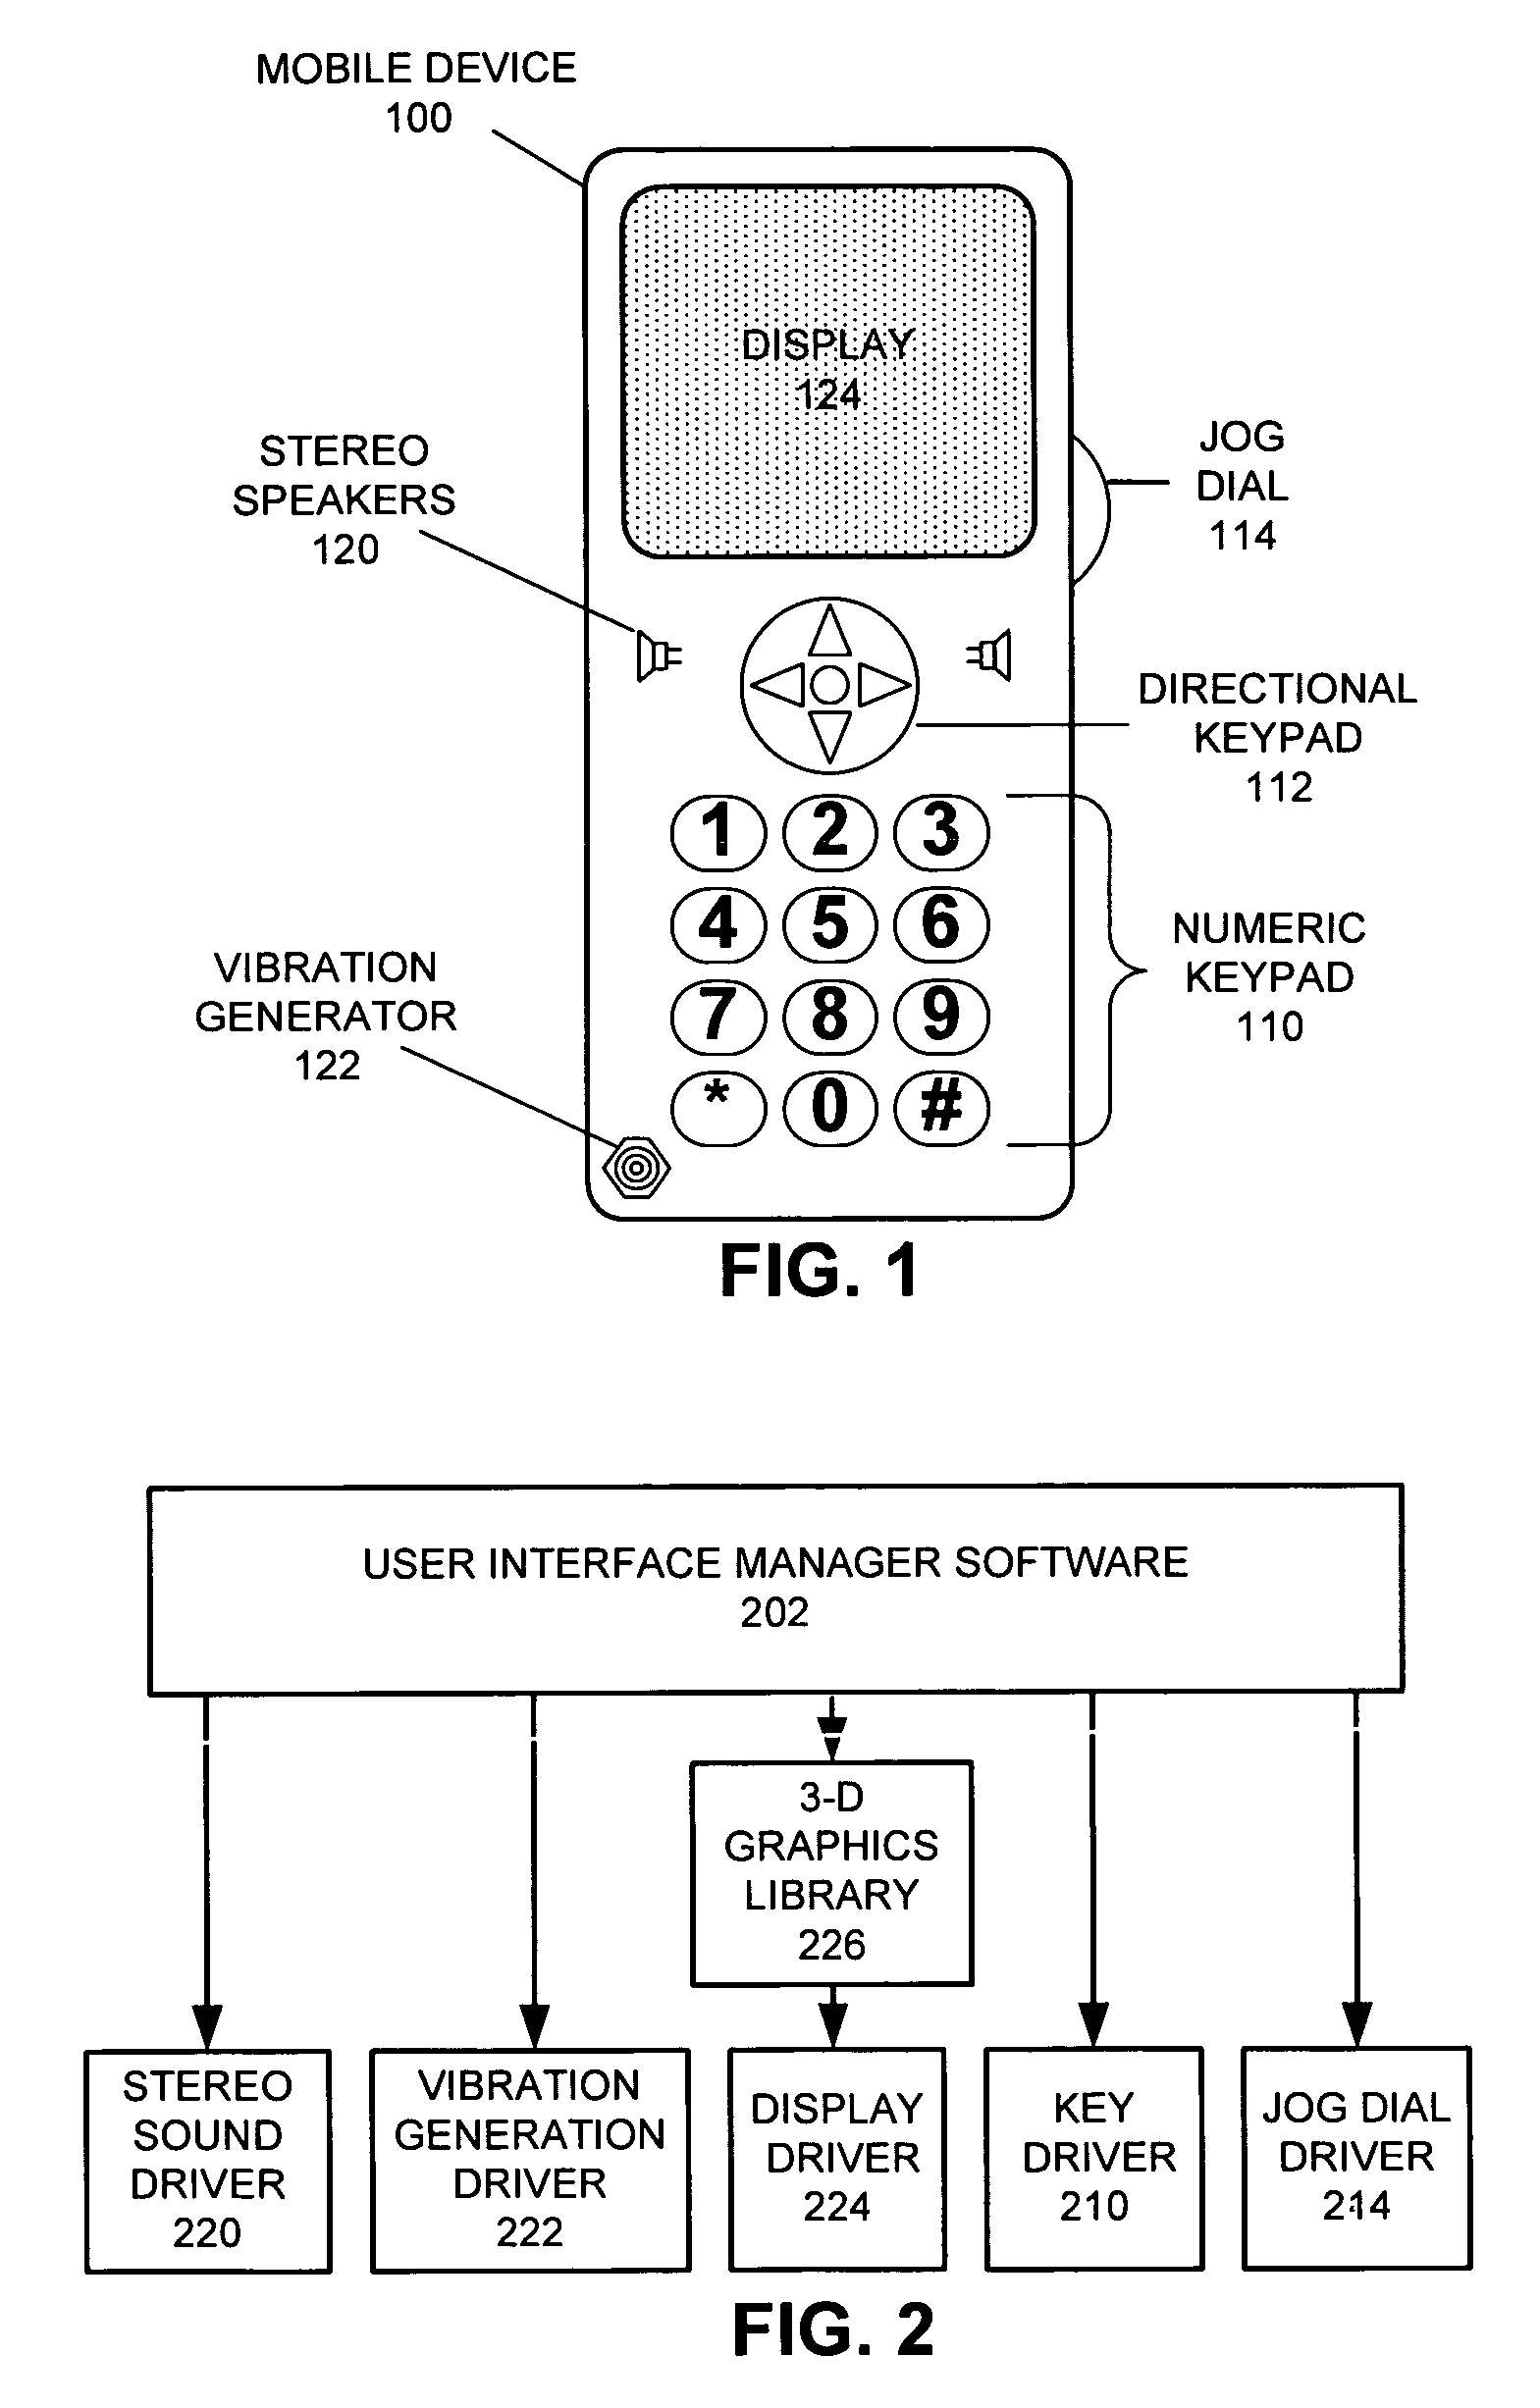 Visual representation and other effects for application management on a device with a small screen